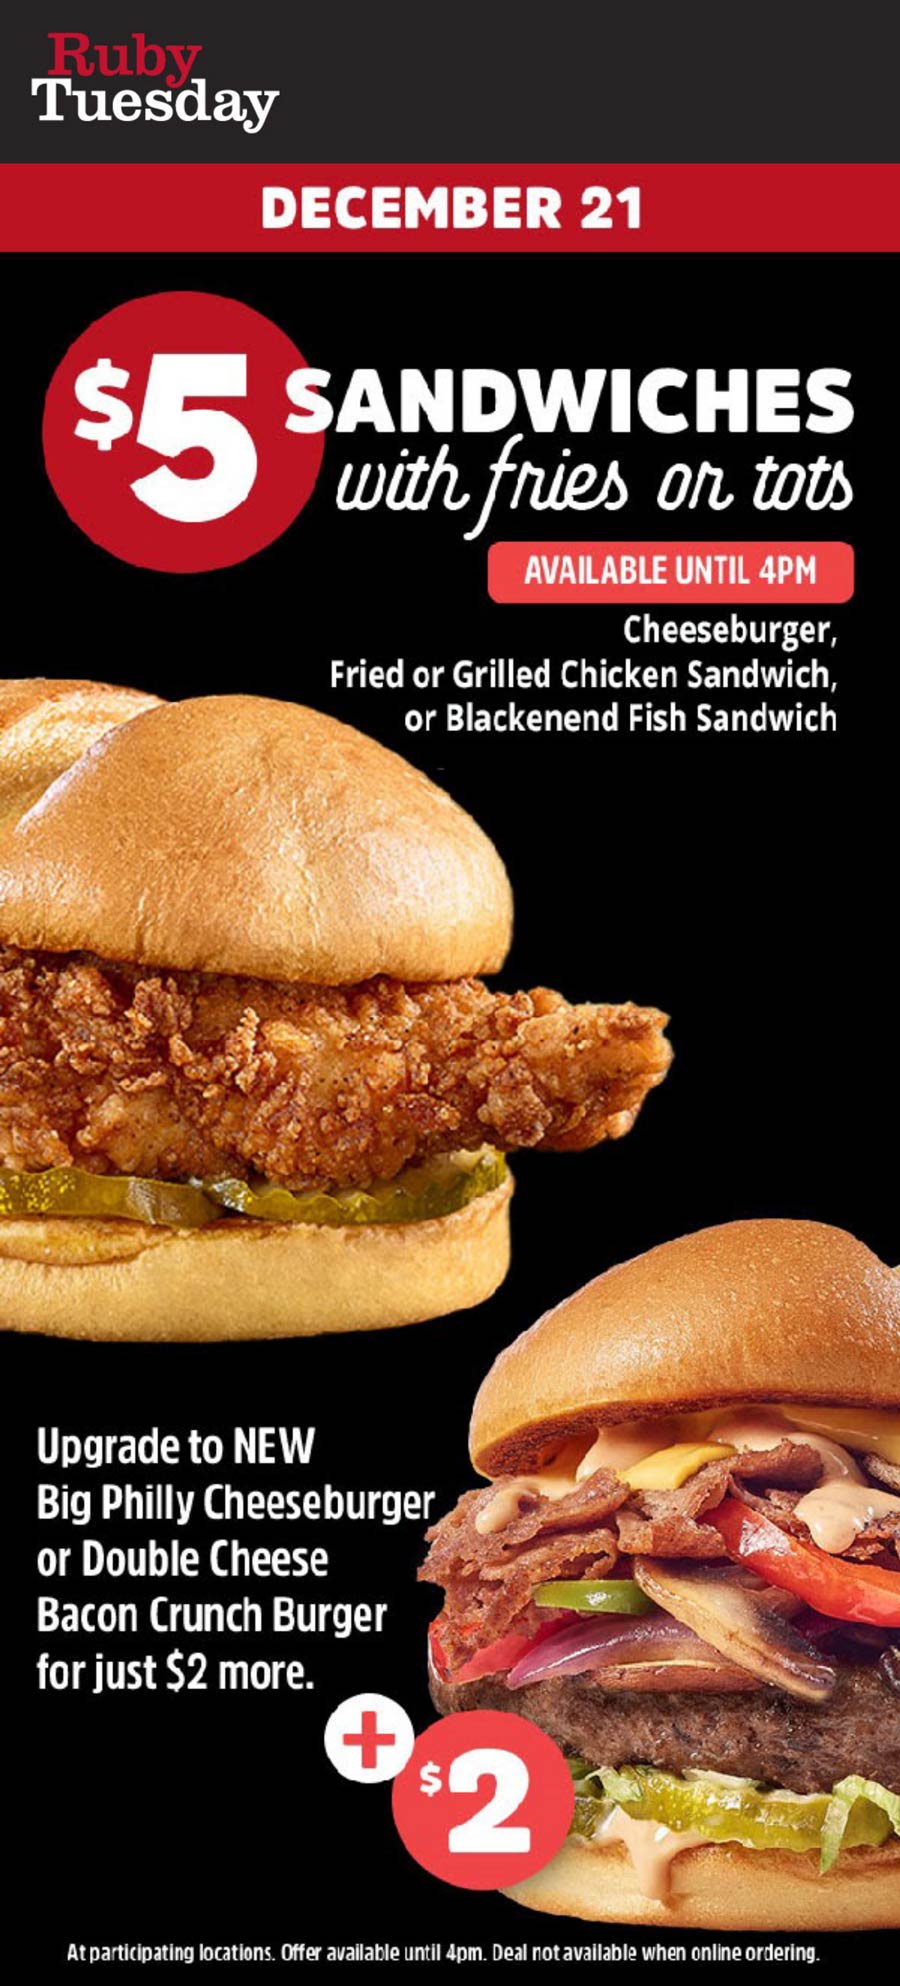 Ruby Tuesday restaurants Coupon  $5 cheeseburger, chicken or fish sandwich + fries = $5 today at Ruby Tuesday #rubytuesday 